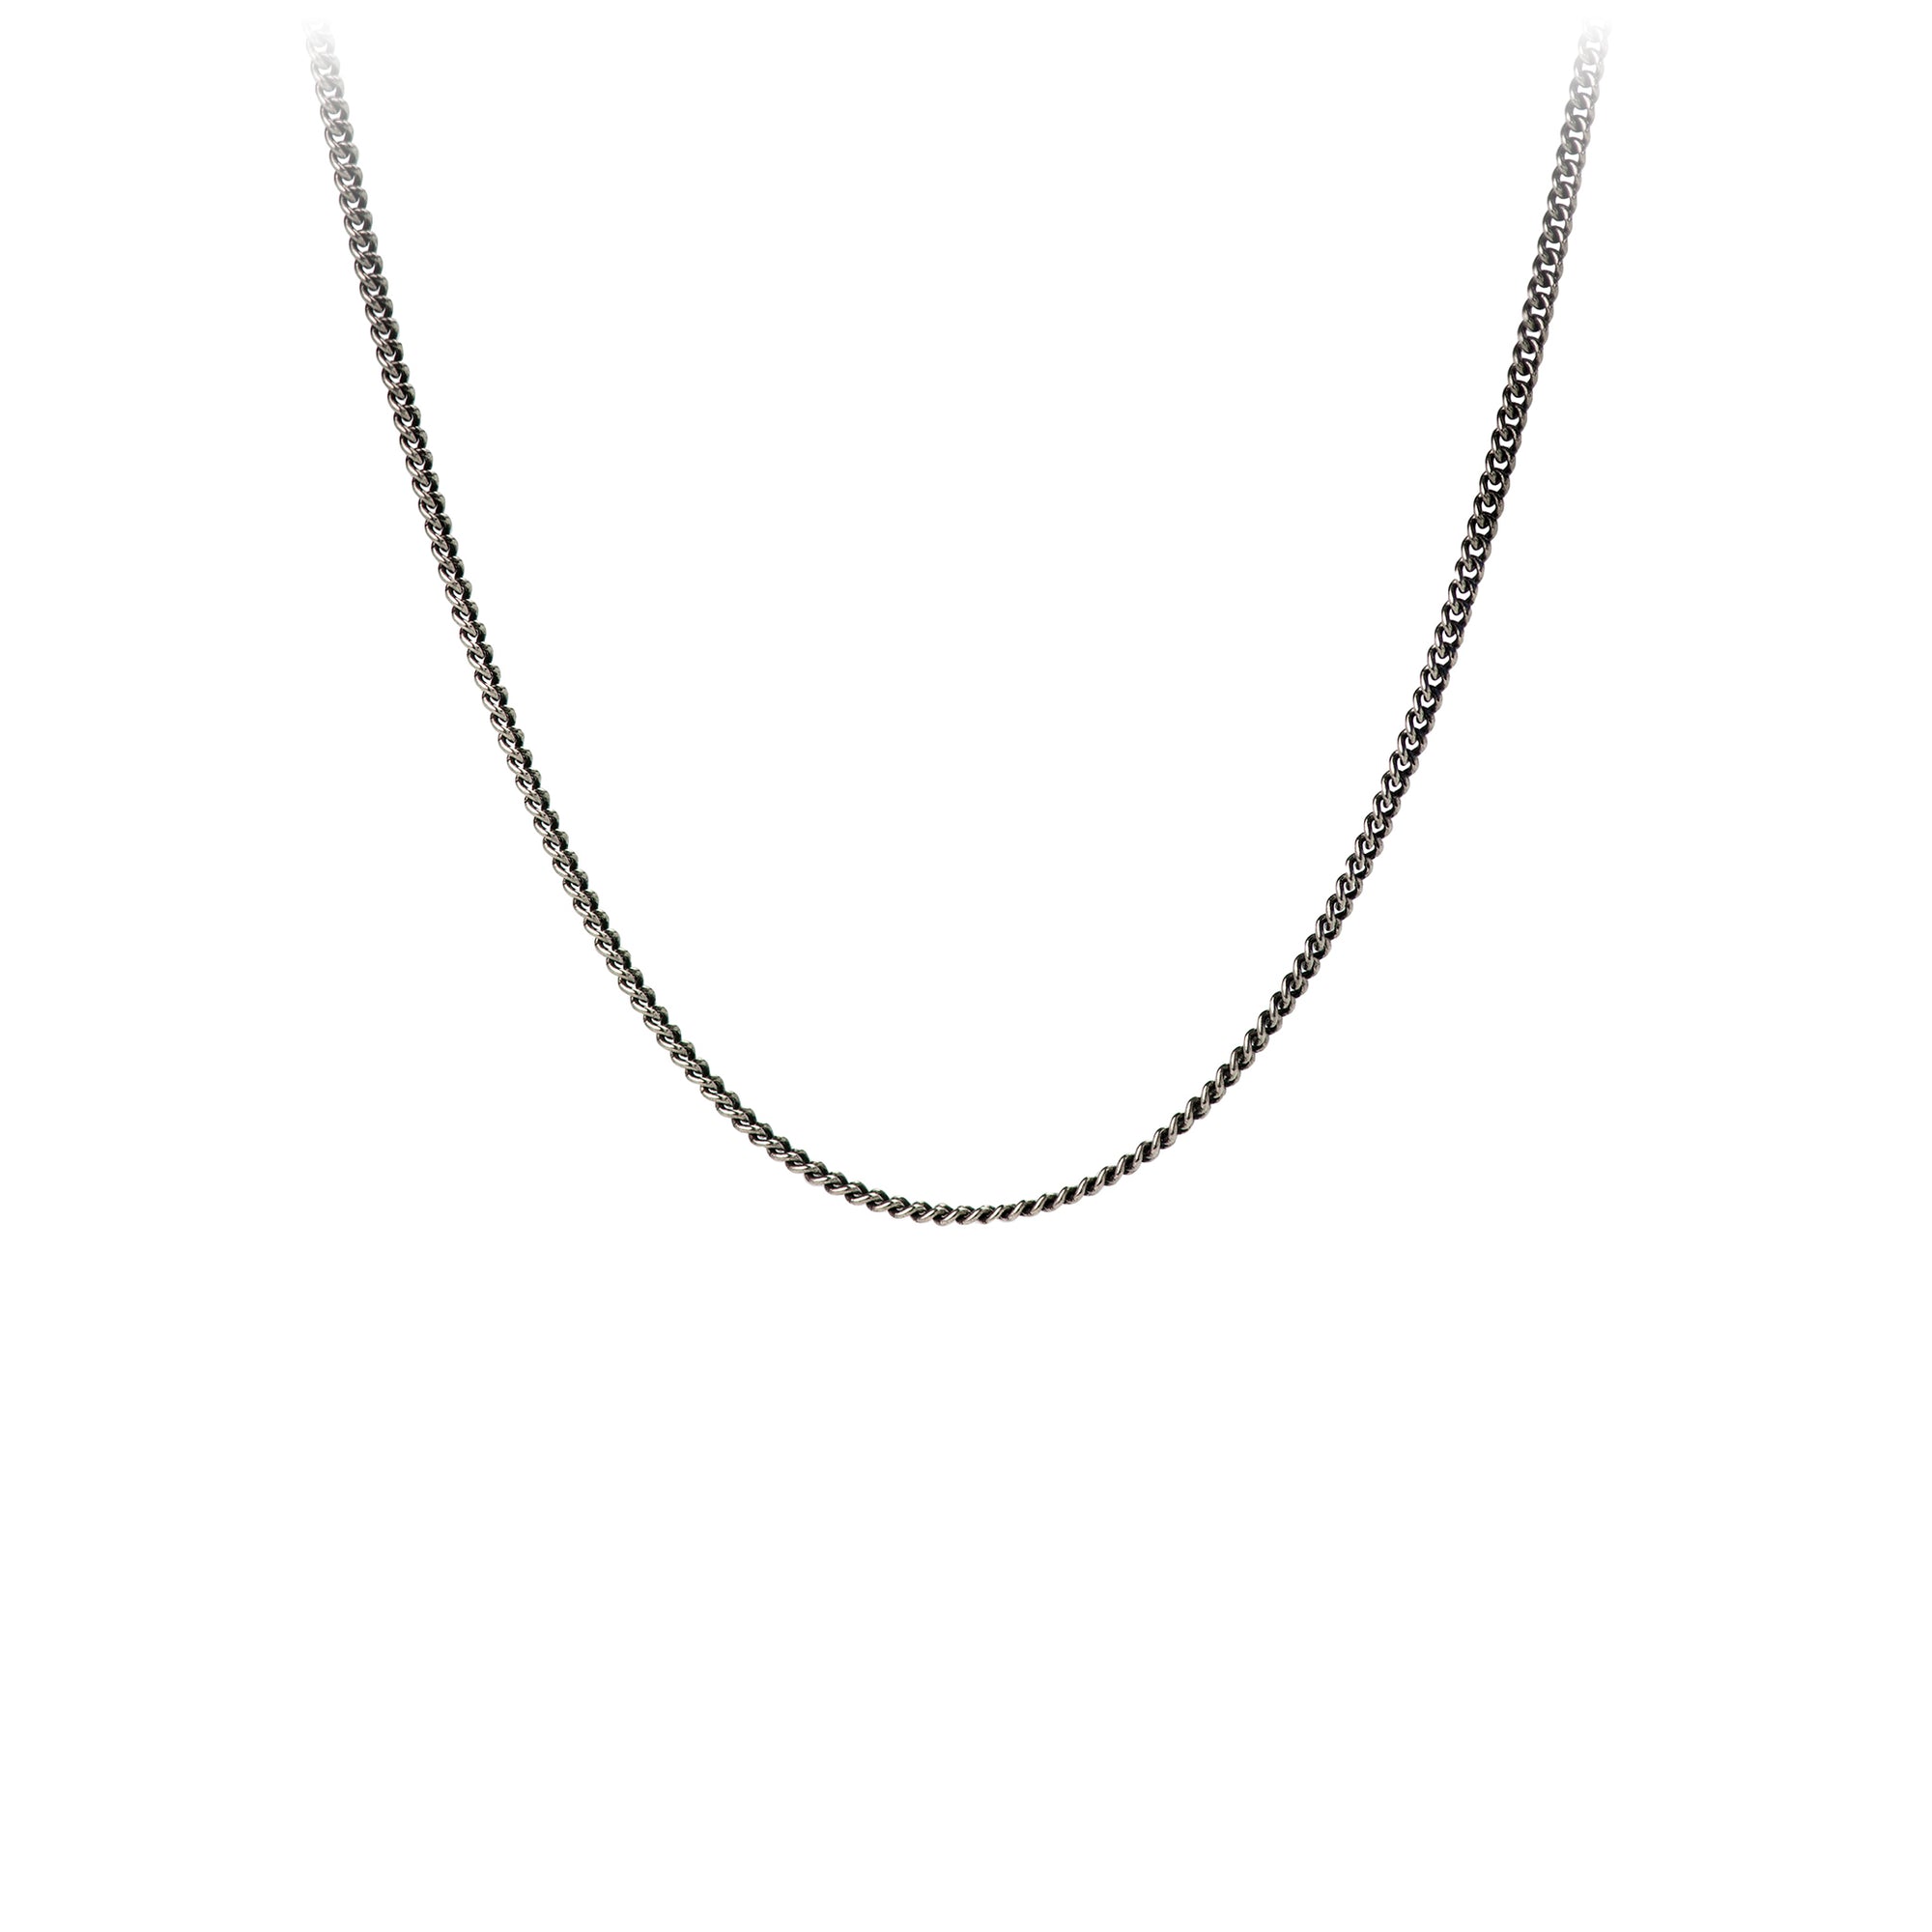 A sterling silver chain with fine oxidized curb links